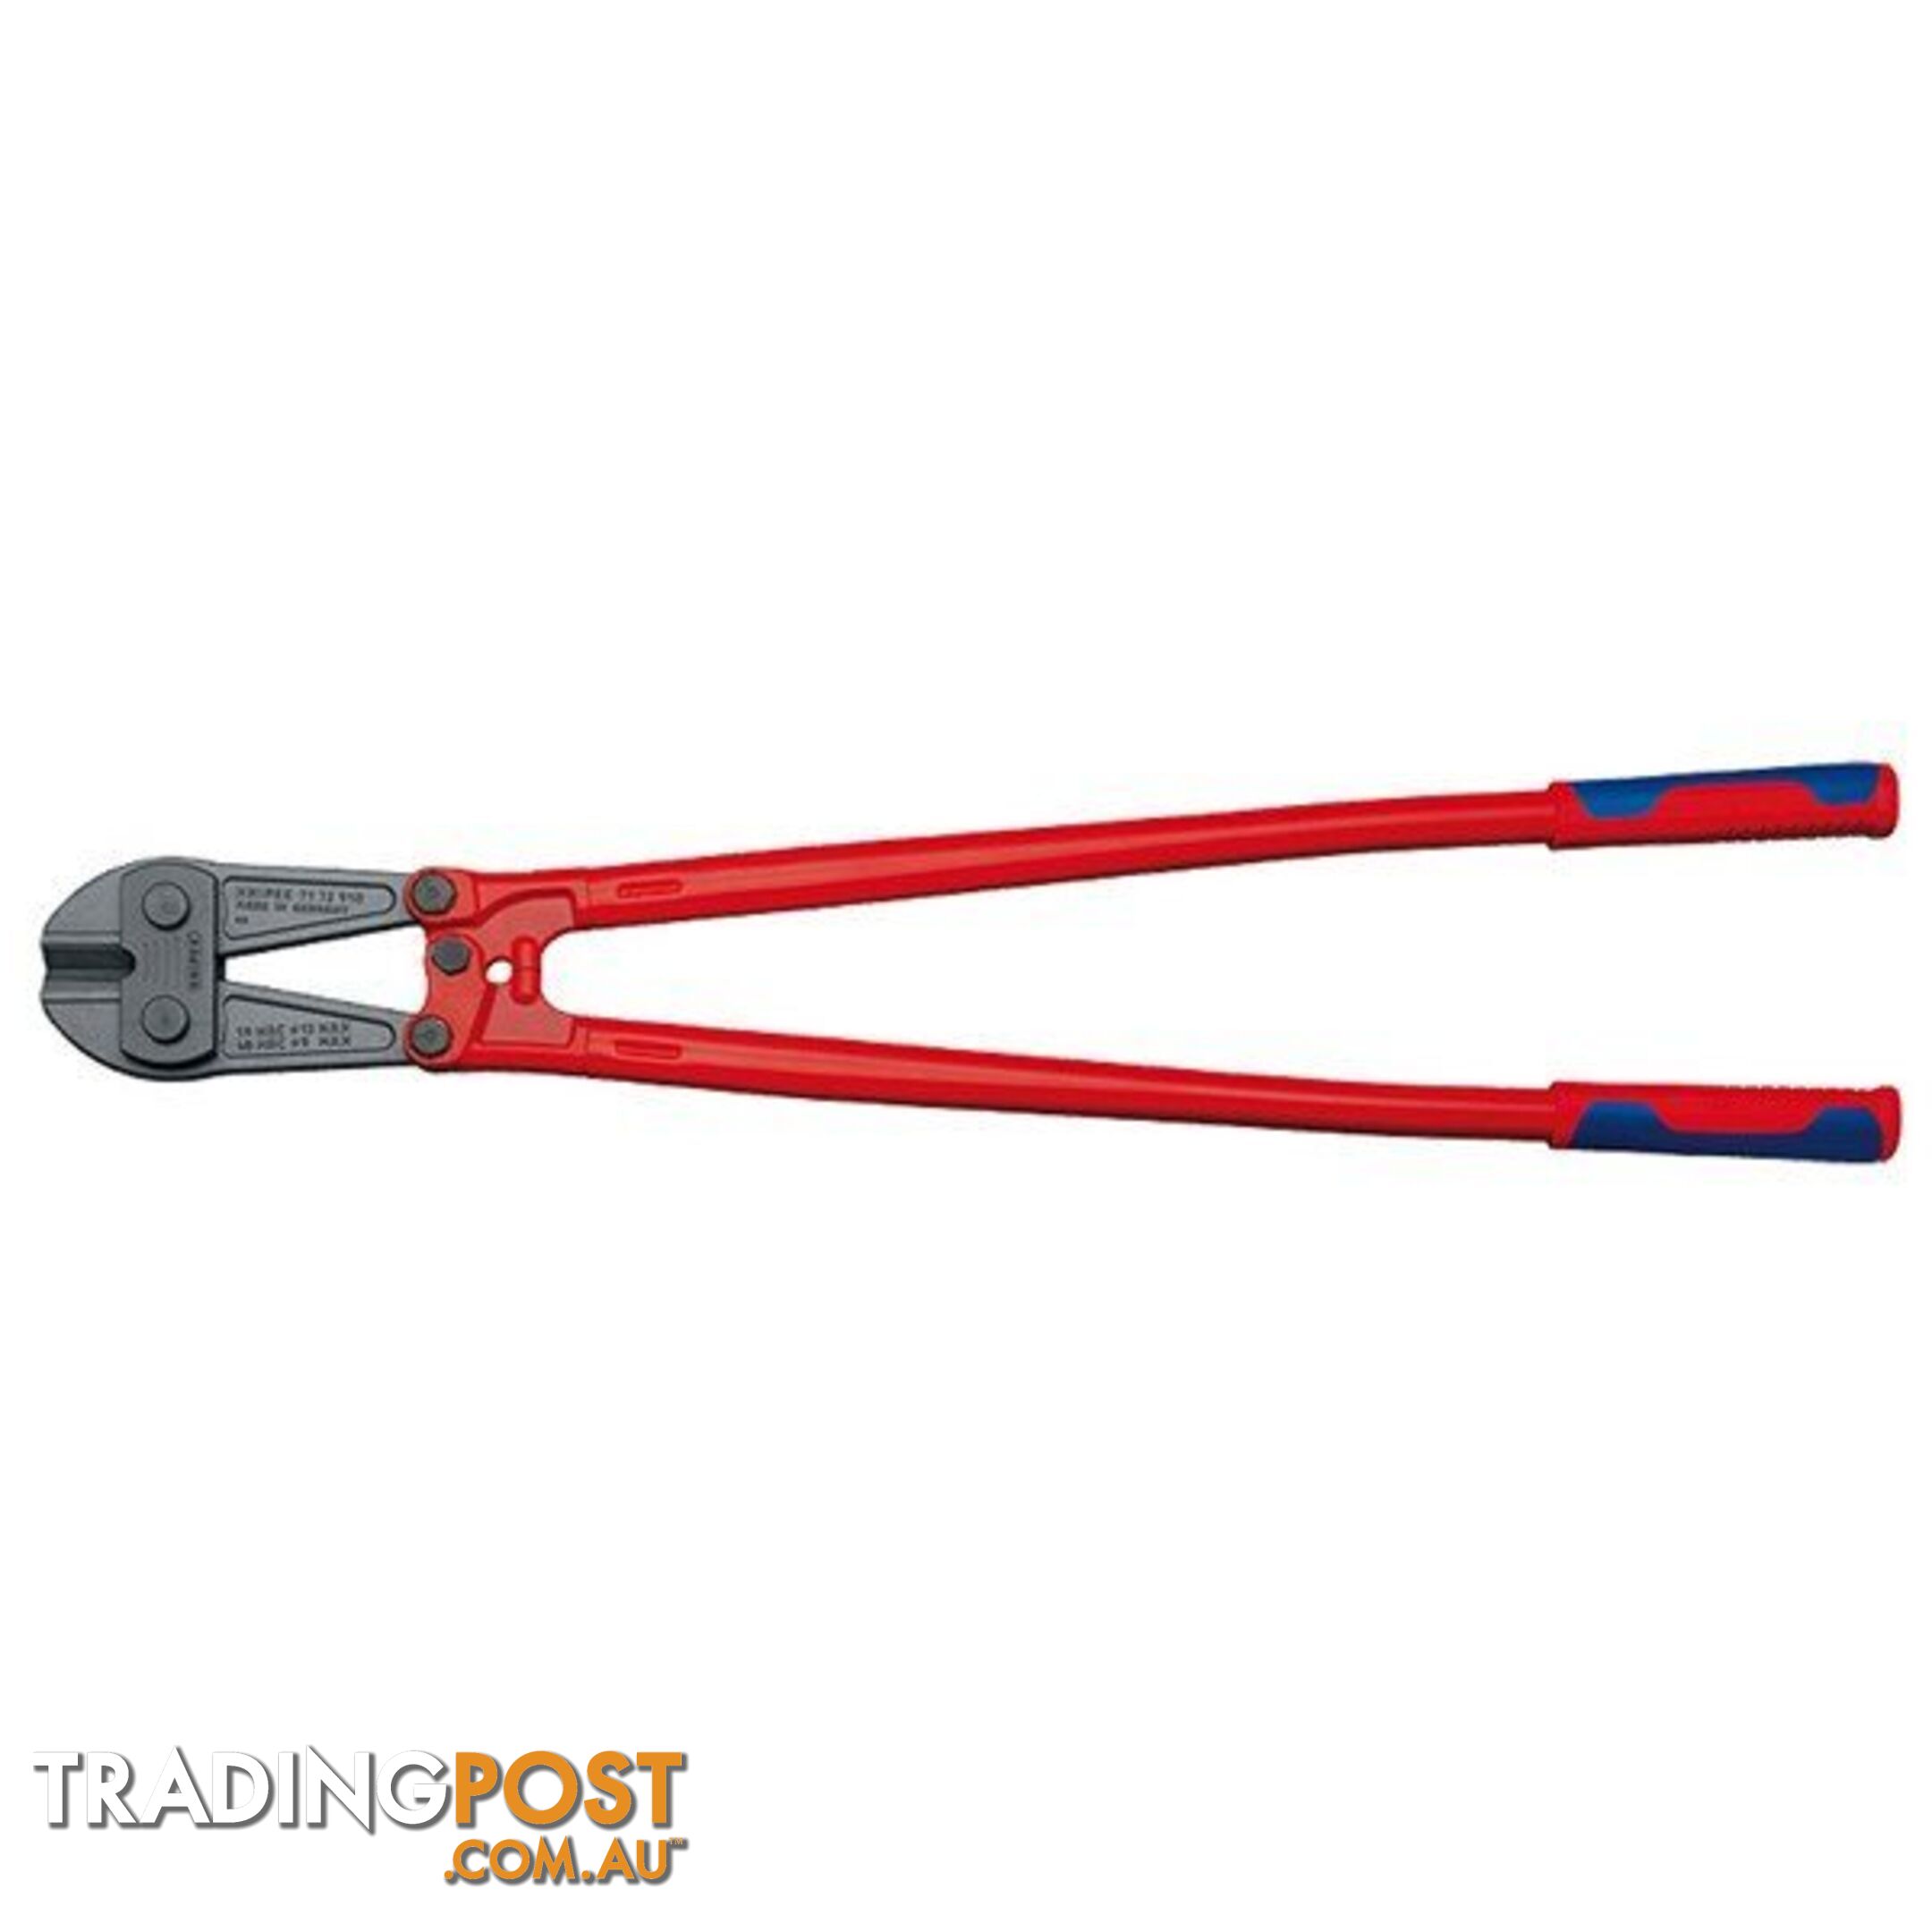 Knipex 910mm Bolt Cutters Capacity Up To 48HRC Hardness SKU - 7172910